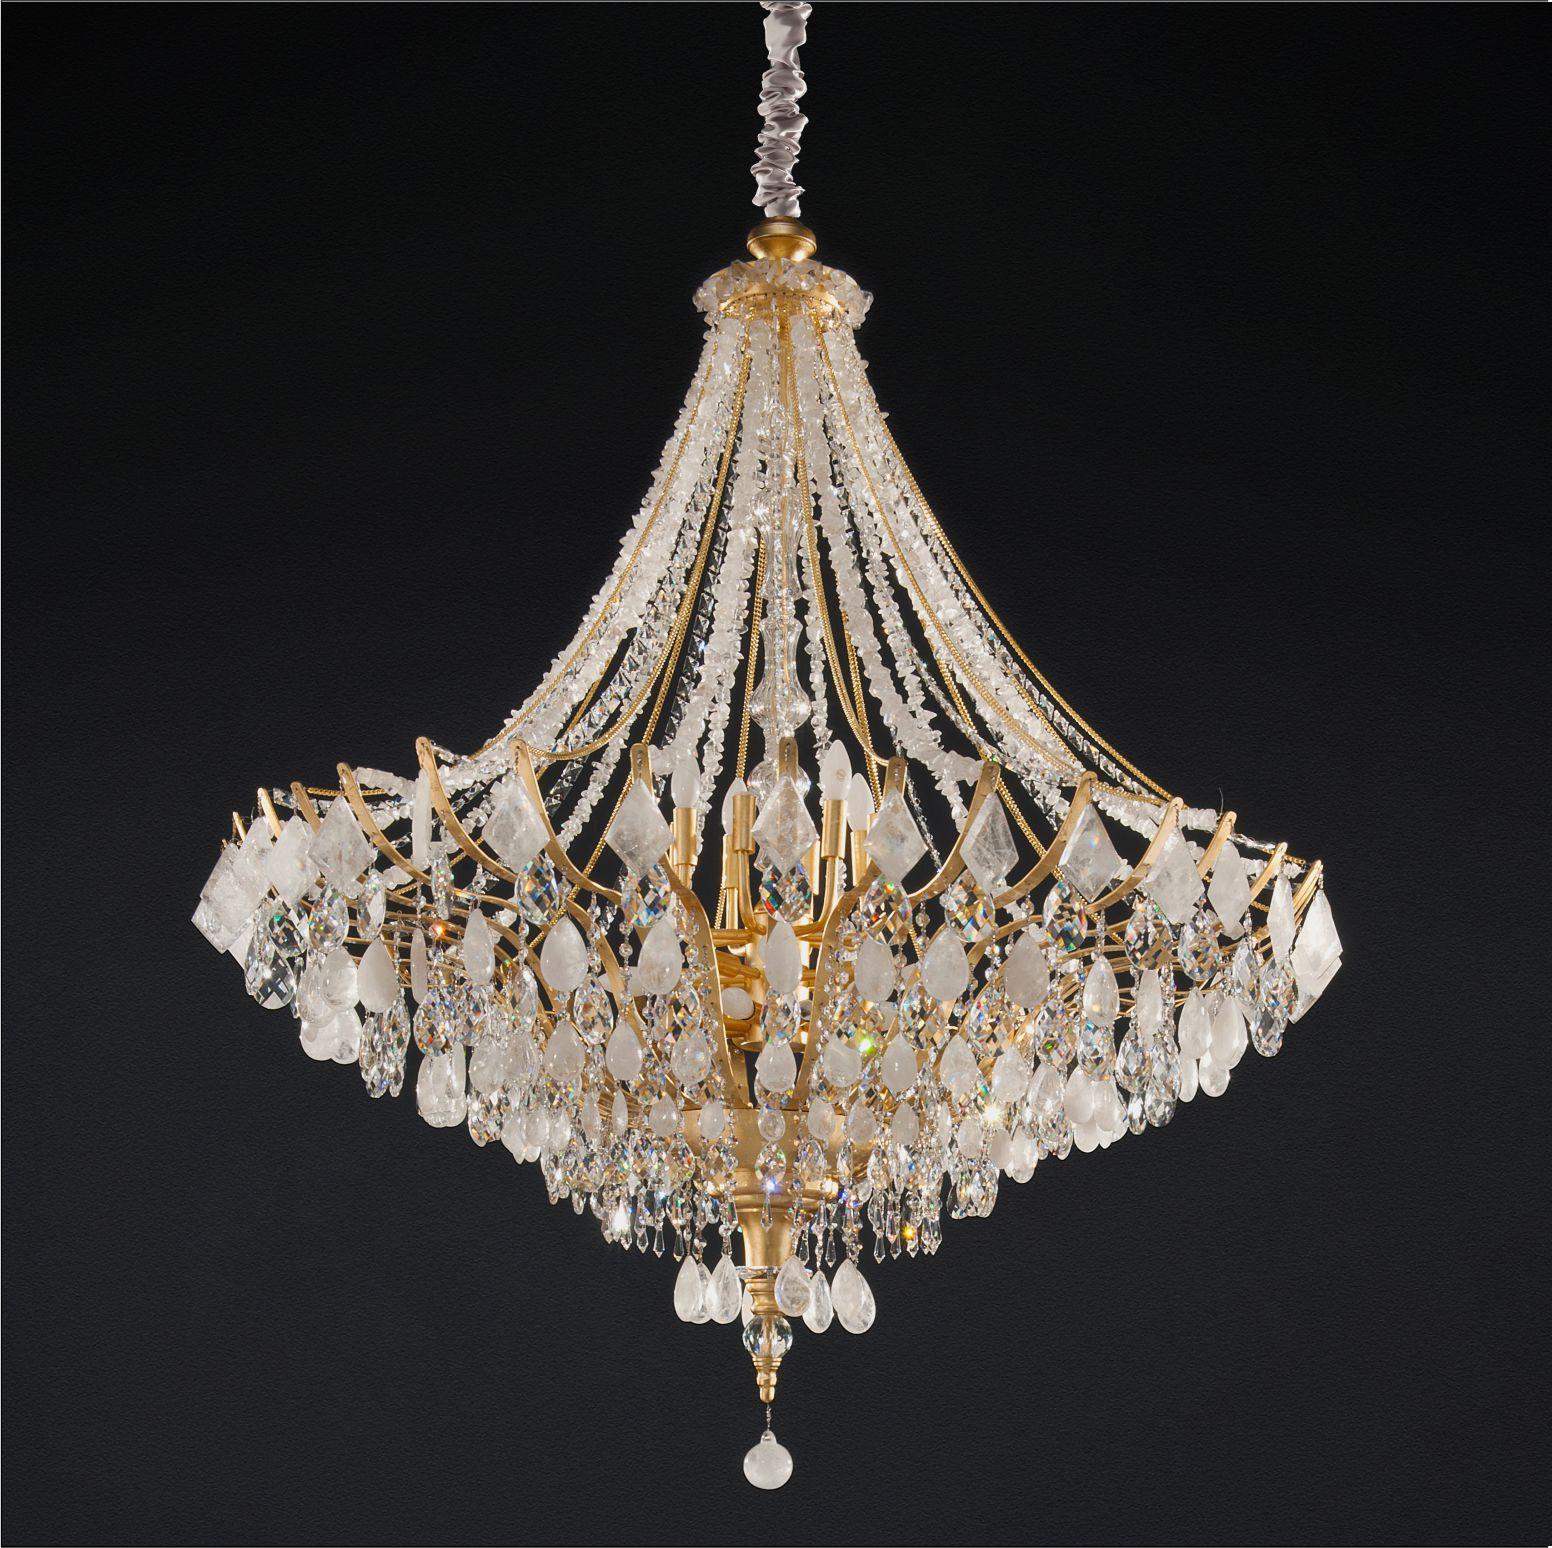 Quartz chandelier lamp 120 by Aver
Dimensions: Diameter 120 x Height 135 cm 
Materials: Aluminum with gold leaf. Natural quartz crystals. 
Lighting: 24 x E14
Available in finishes: Silver veneer, aged silver veneer, gold veneer, aged gold veneer,